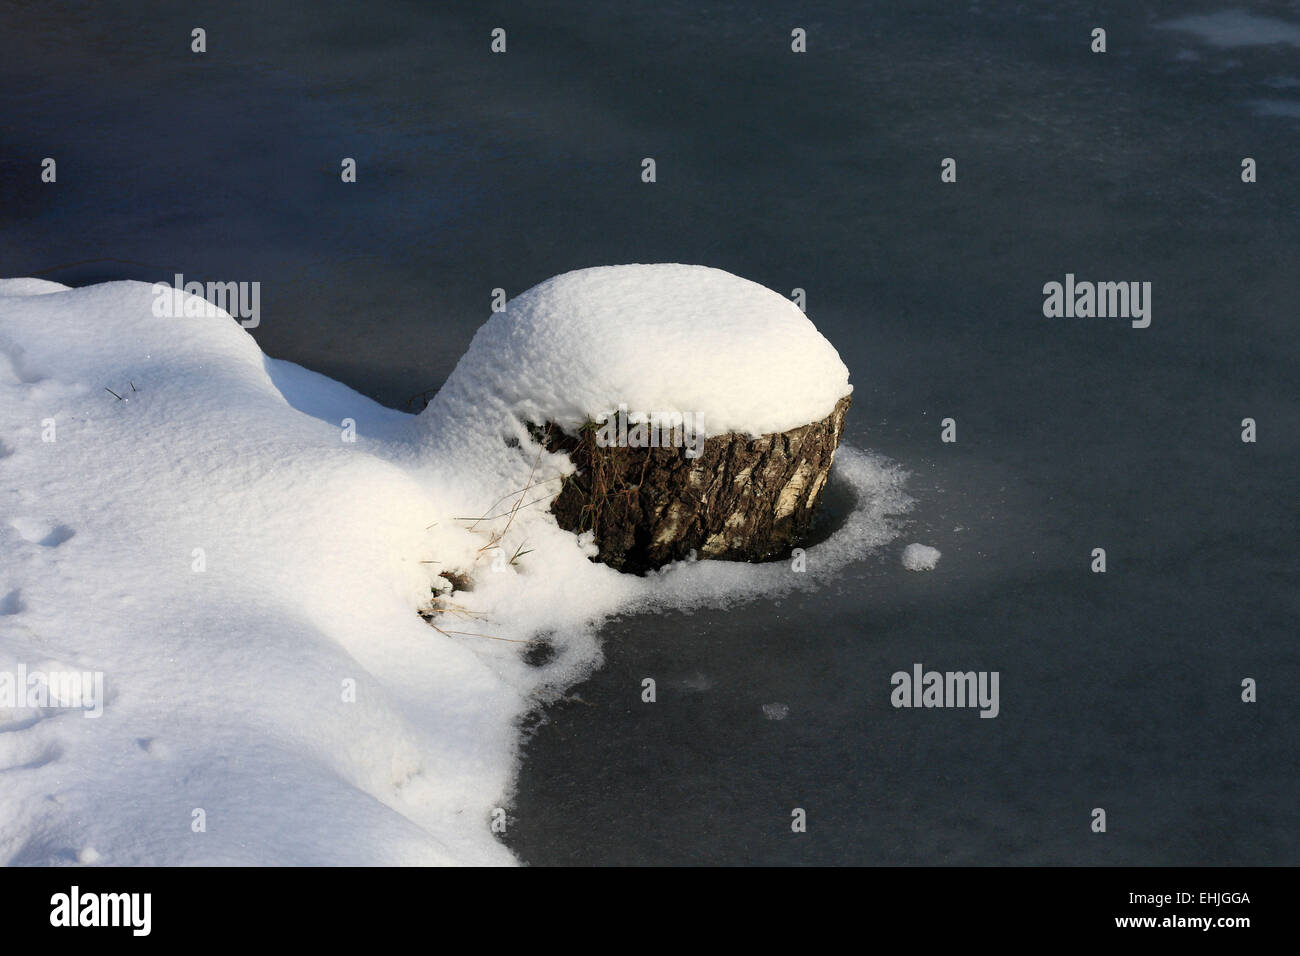 Snow covered tree stump in a pond Stock Photo